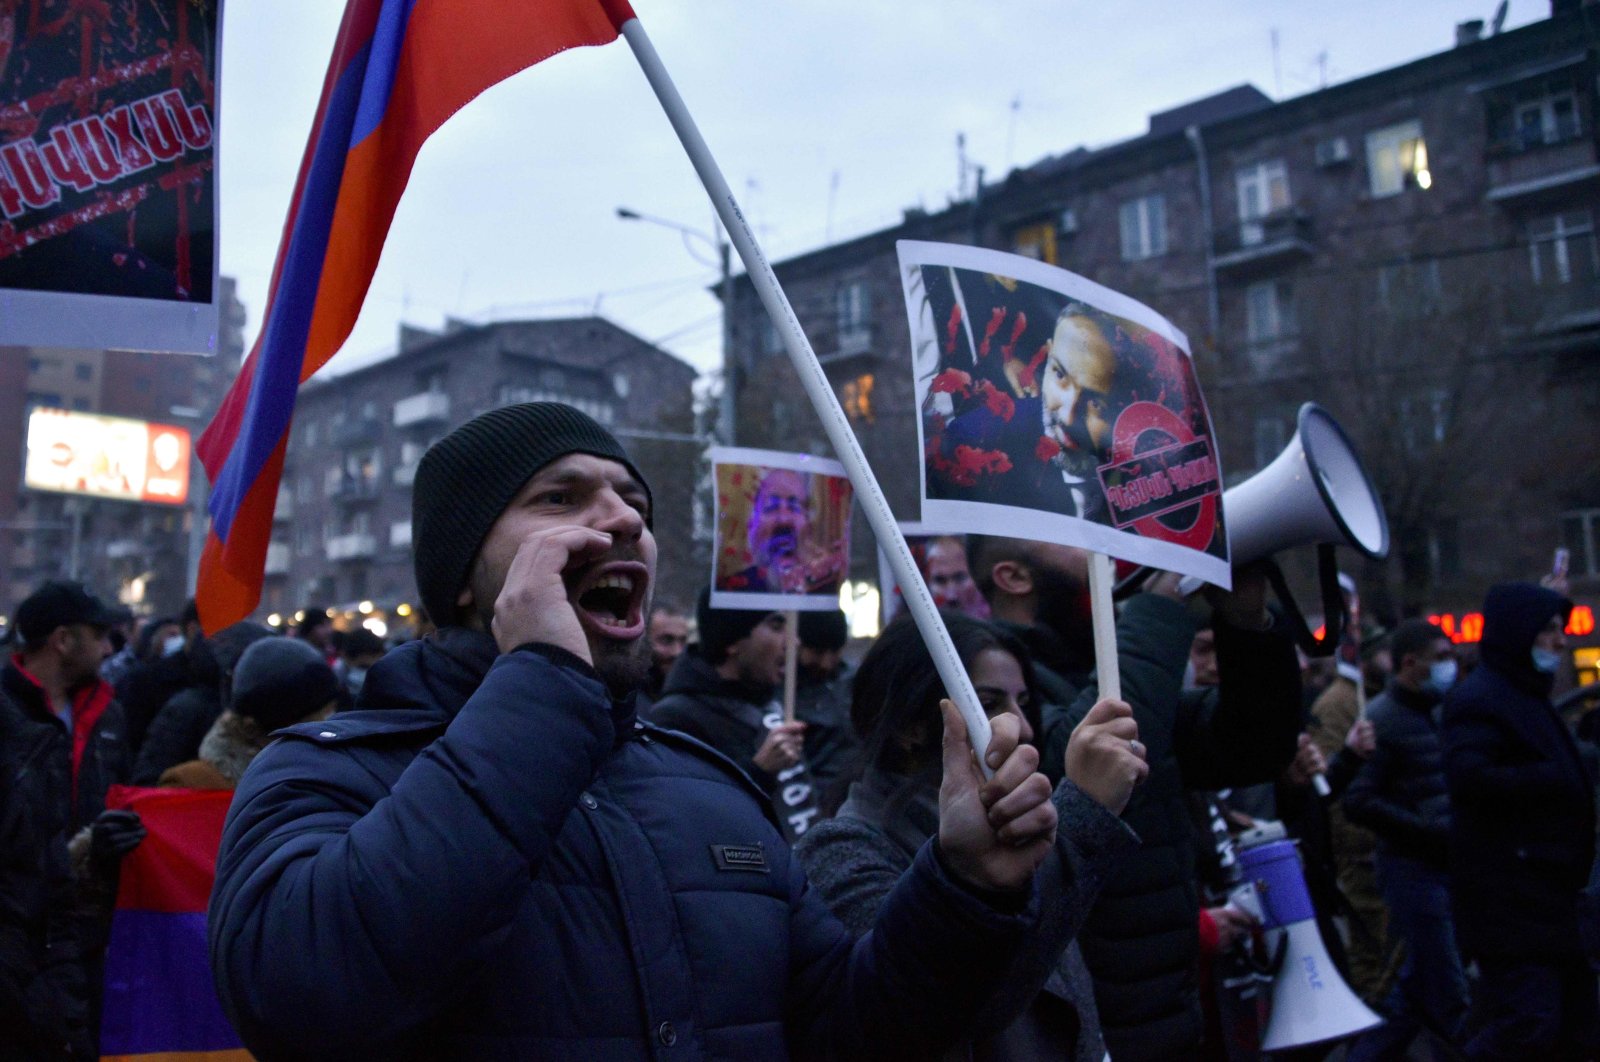 Protesters march through the streets of Yerevan to demand the resignation of Armenian Prime Minister Nikol Pashinian over a controversial peace agreement with Azerbaijan that ended six weeks of war over the formerly occupied Nagorno-Karabakh region, Yerevan, Armenia, Dec. 14, 2020. (AFP Photo)